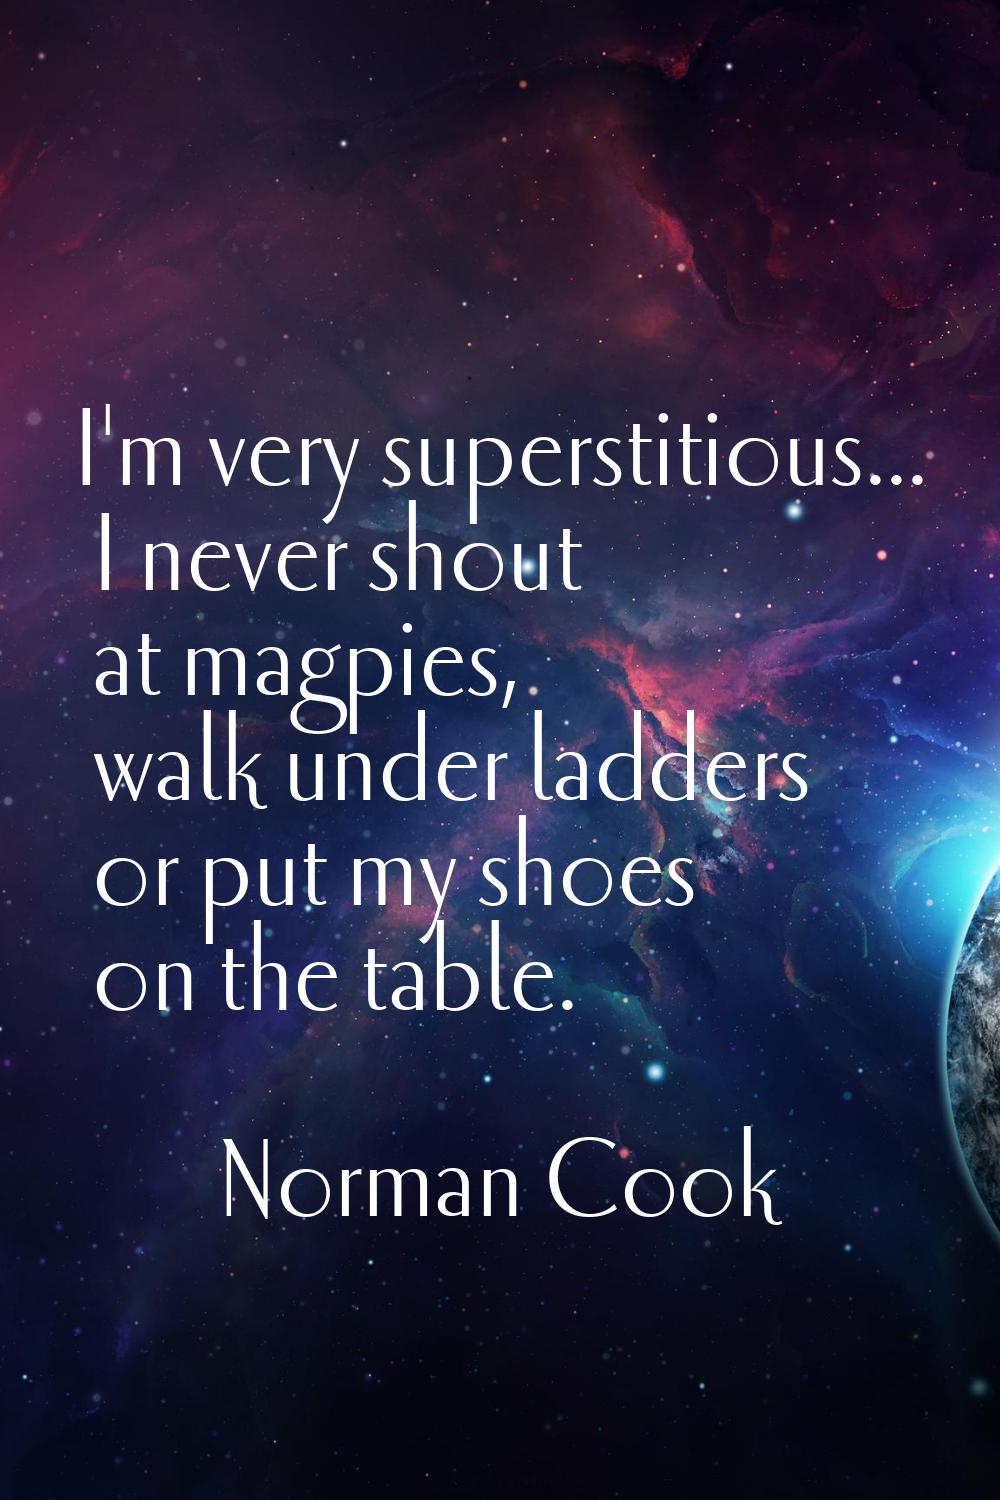 I'm very superstitious... I never shout at magpies, walk under ladders or put my shoes on the table